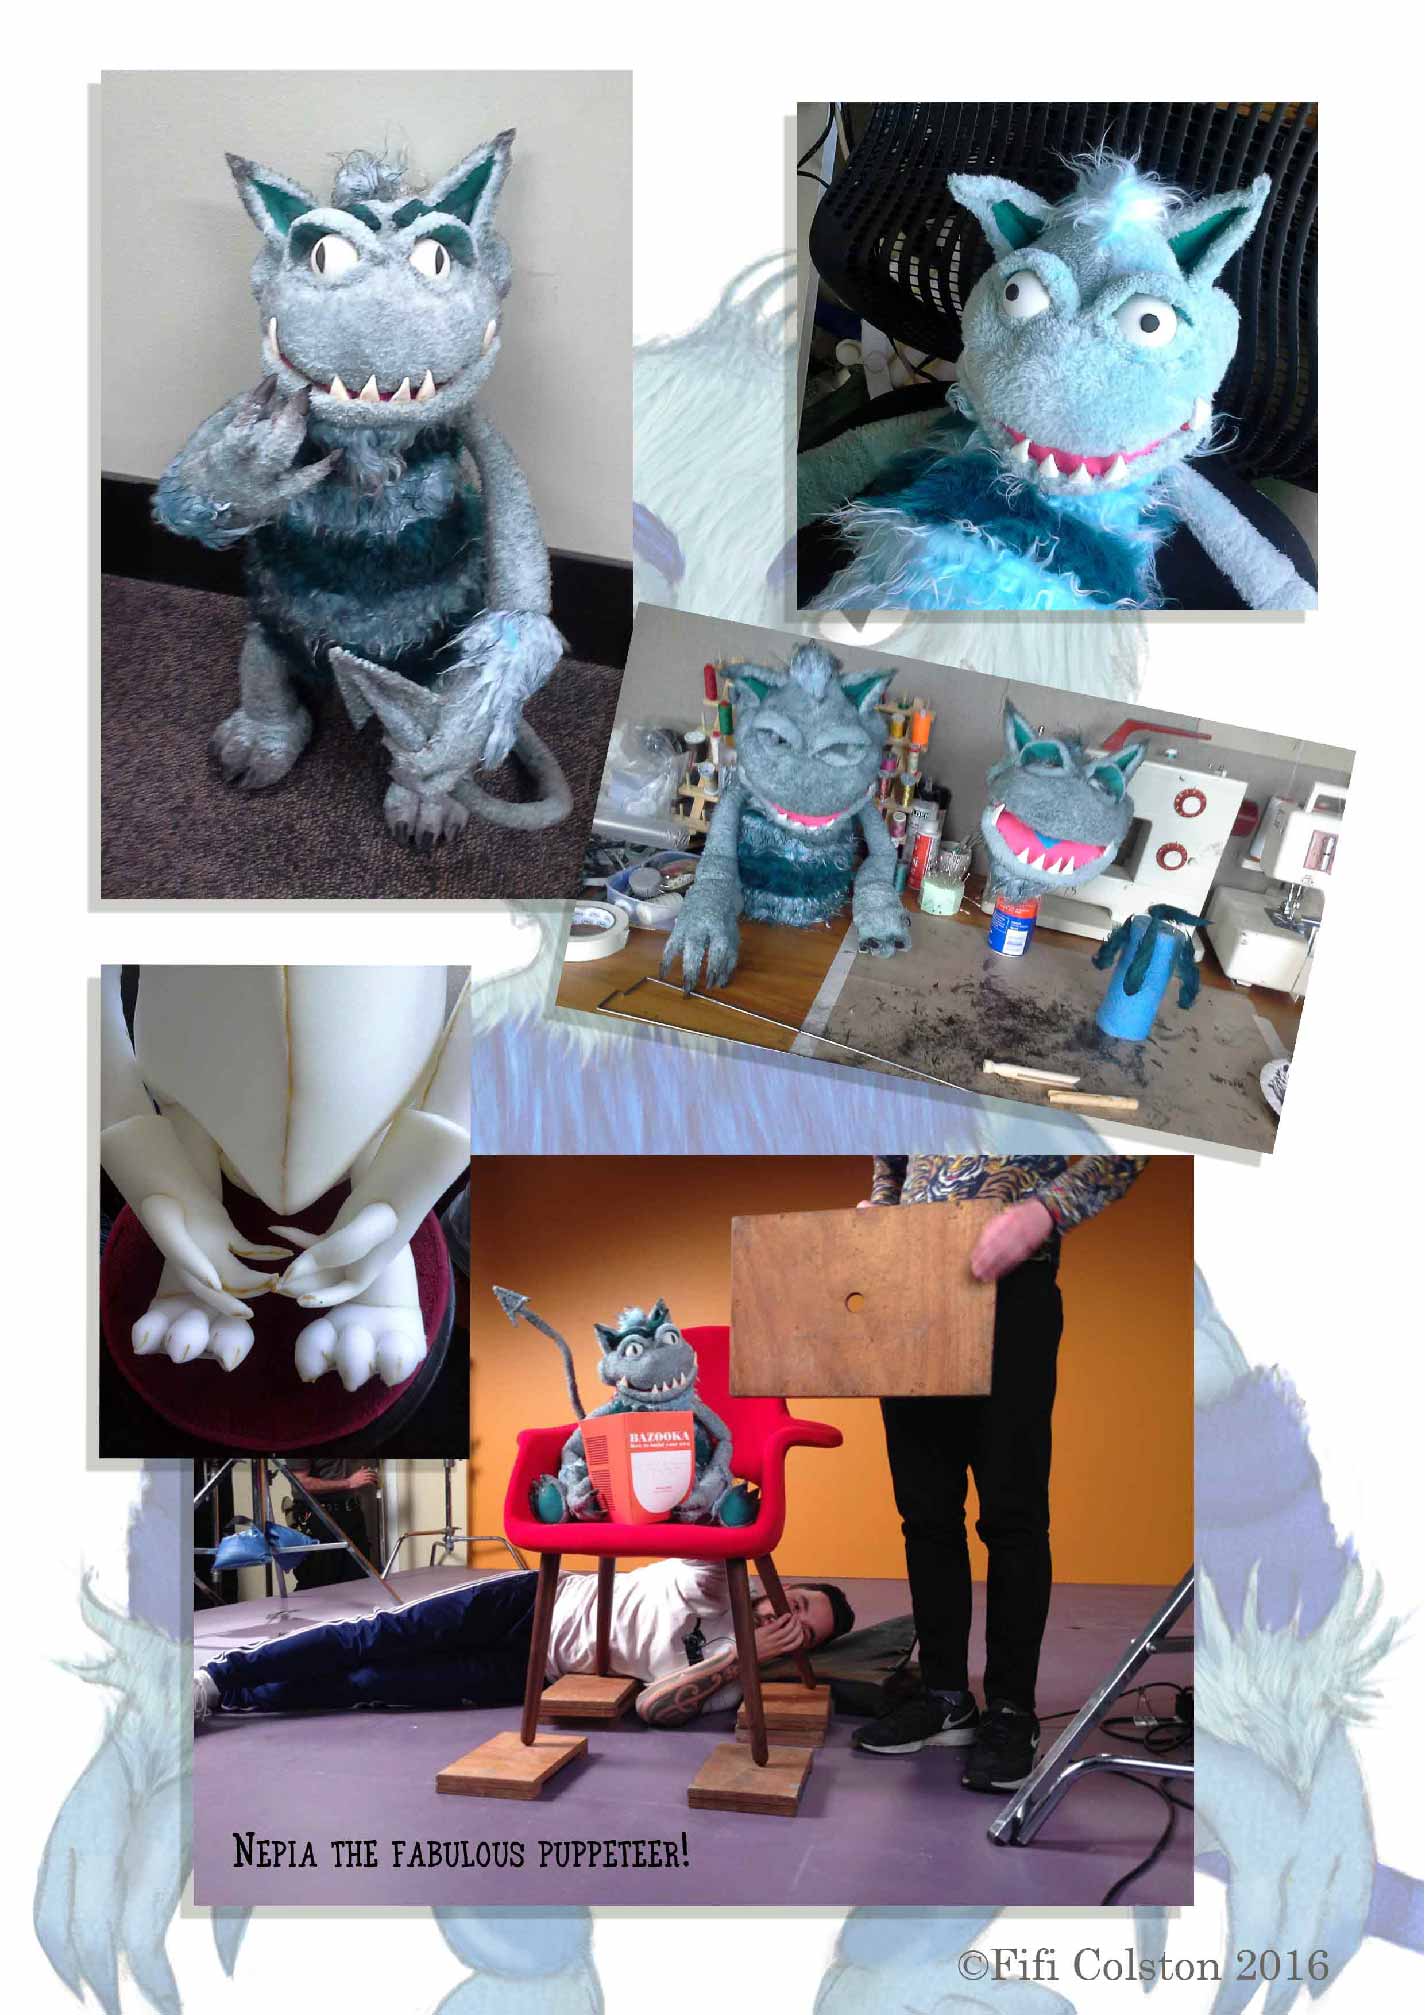 Chance-tear sheet: Collage of images of a monster-looking puppeteer.